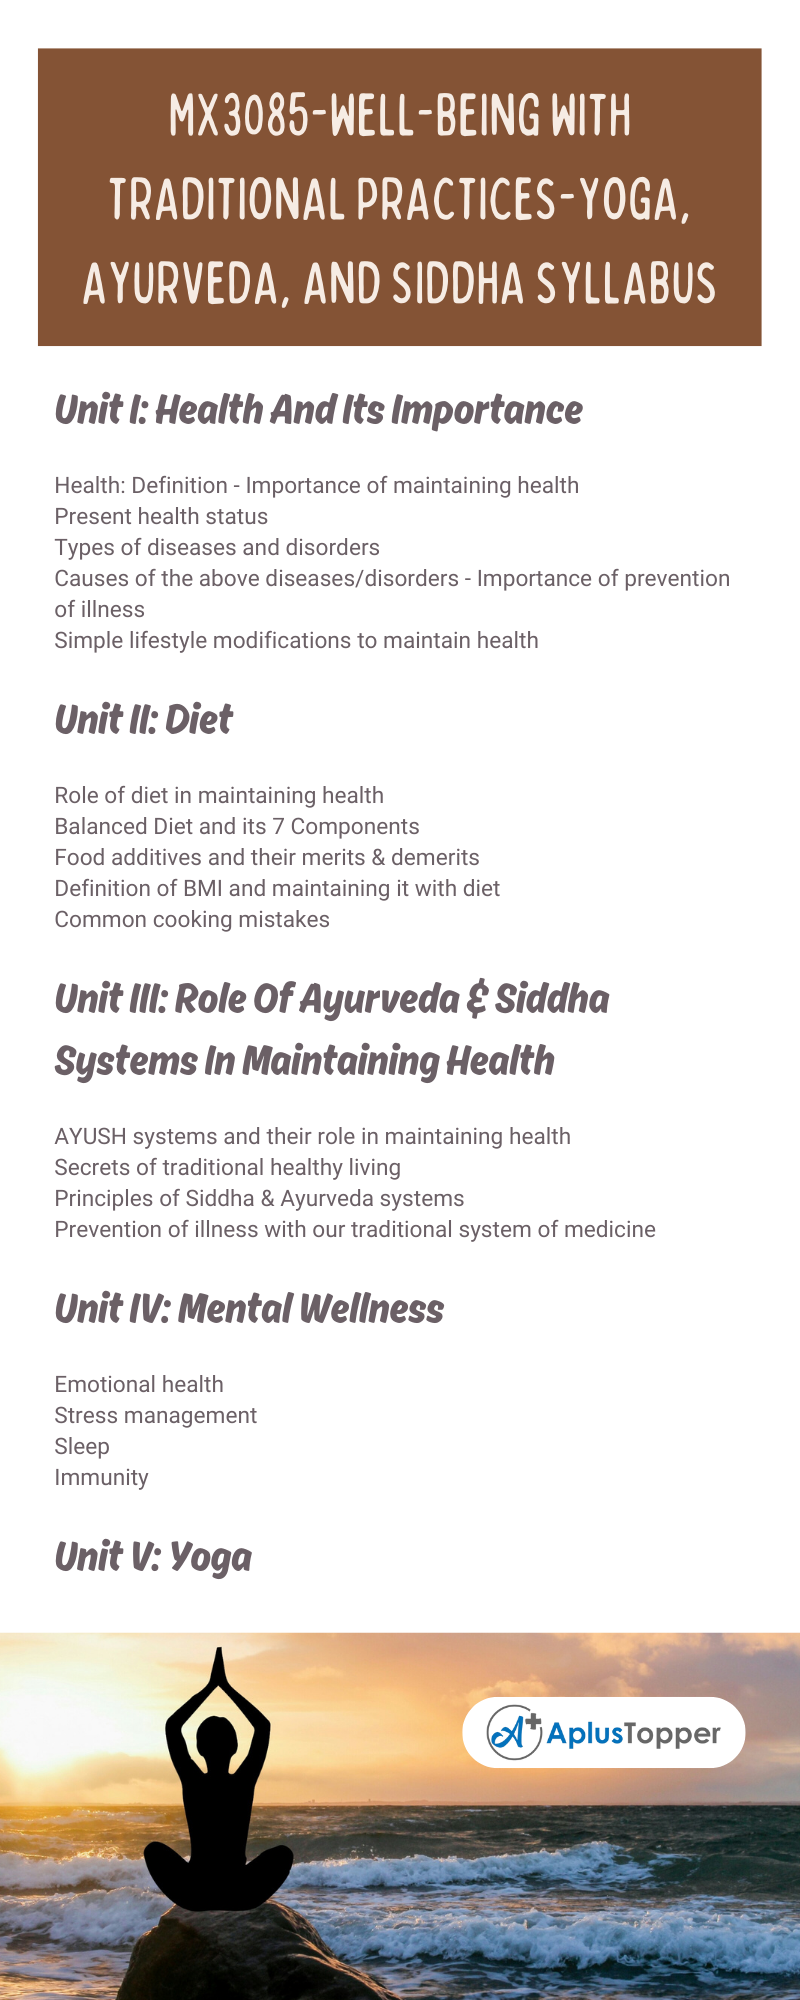 MX3085-Well-Being With Traditional Practices-Yoga, Ayurveda, And Siddha Syllabus Regulation 2021 Anna University